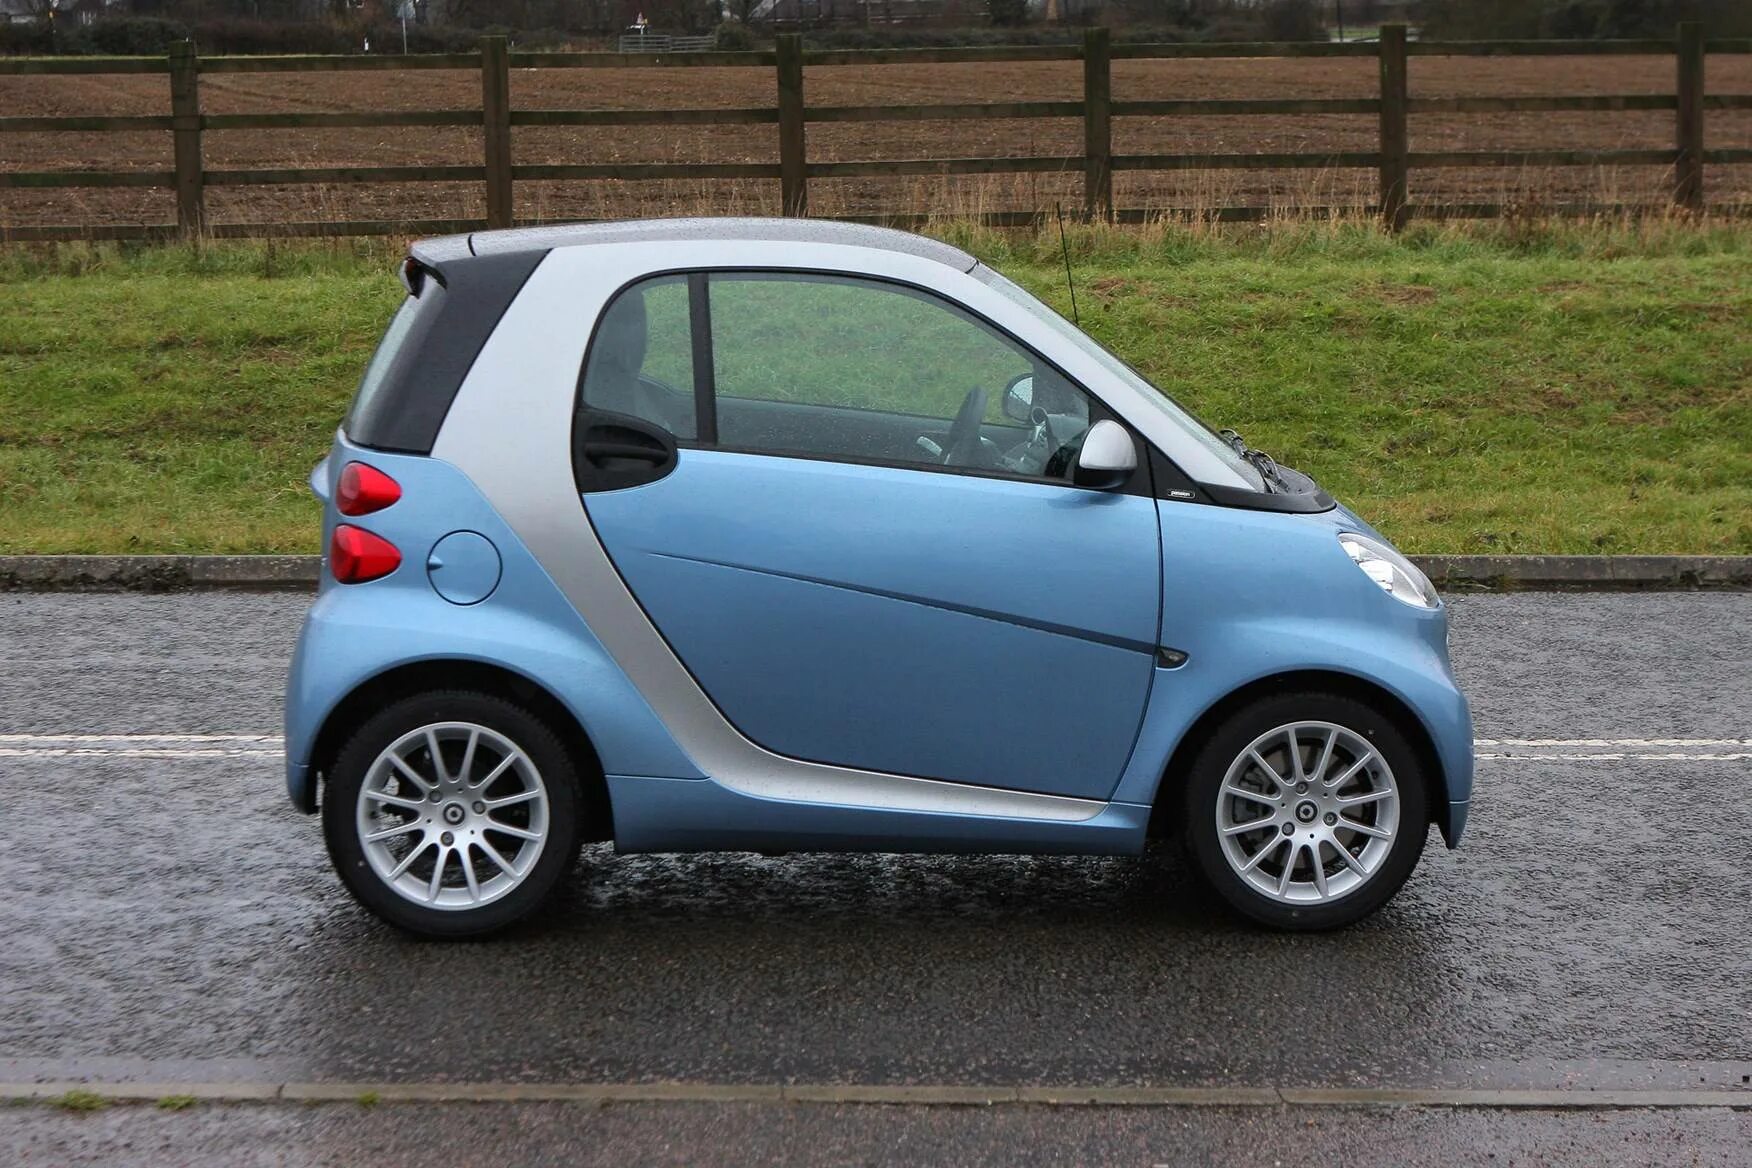 Mercedes Smart Fortwo. Smart Fortwo 1. Smart Fortwo Coupe. Smart Fortwo купе.